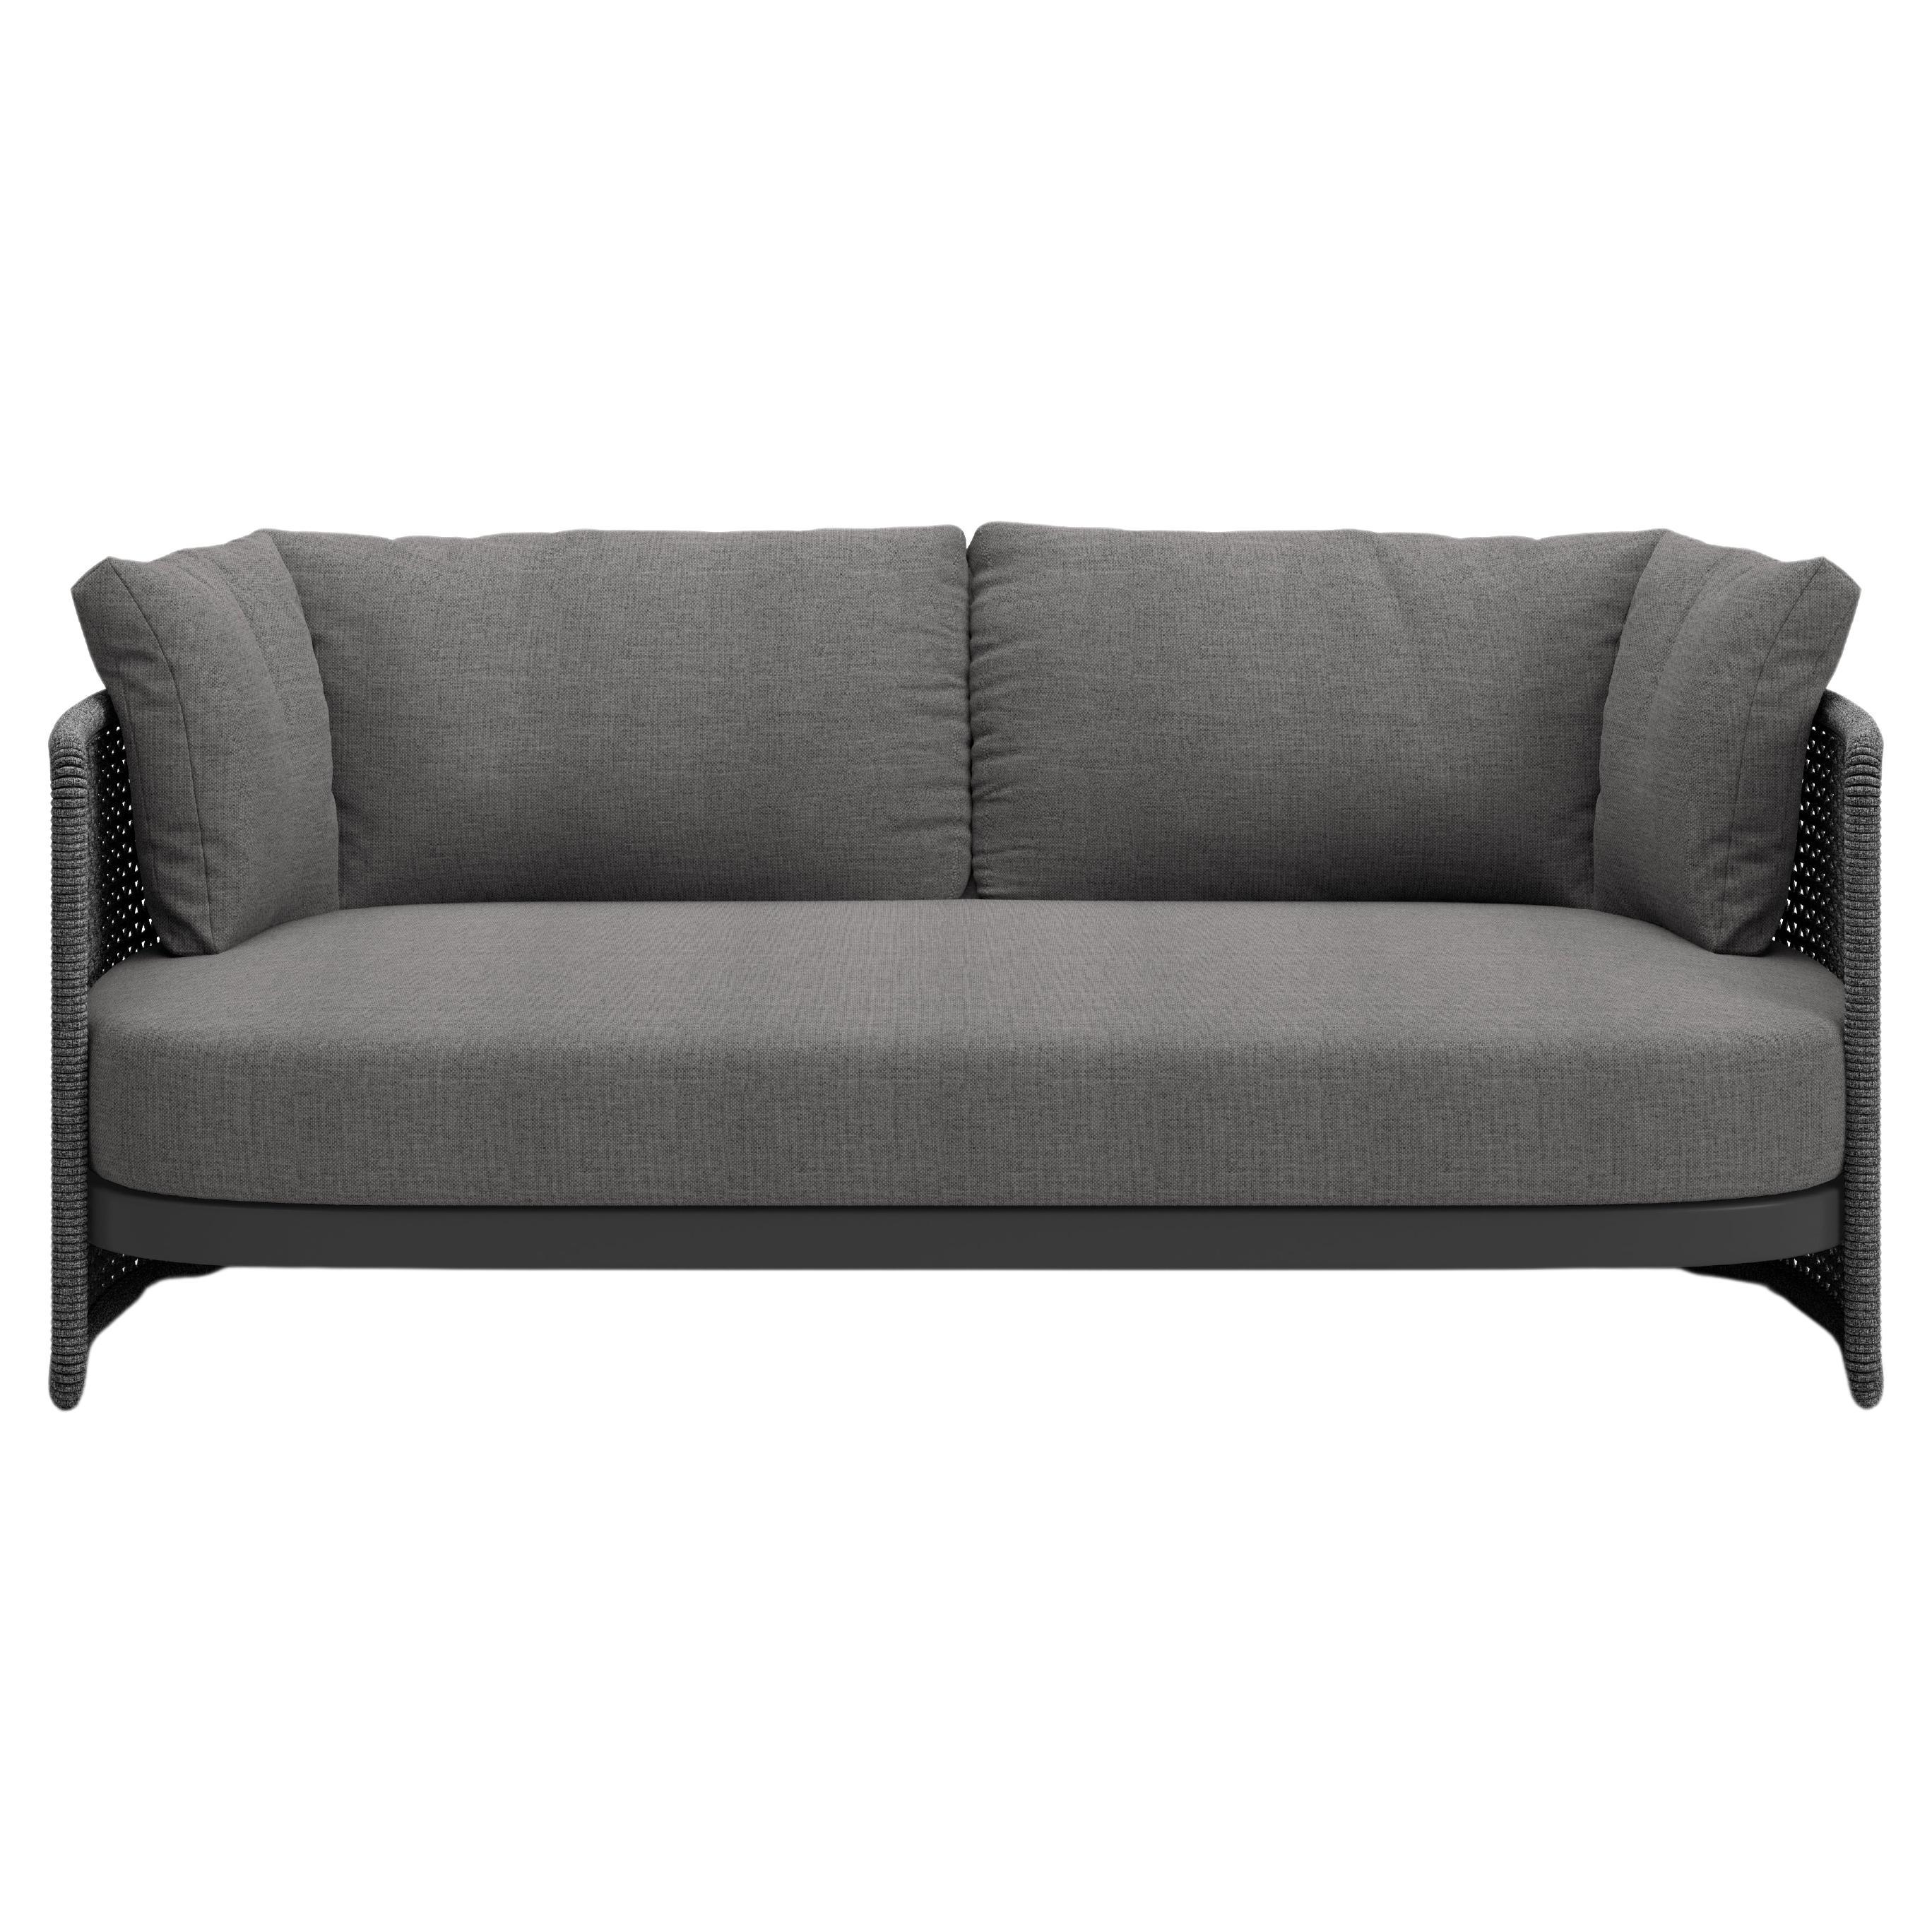 Miura-nightfall Outdoor 2 Seater Sofa by SNOC For Sale